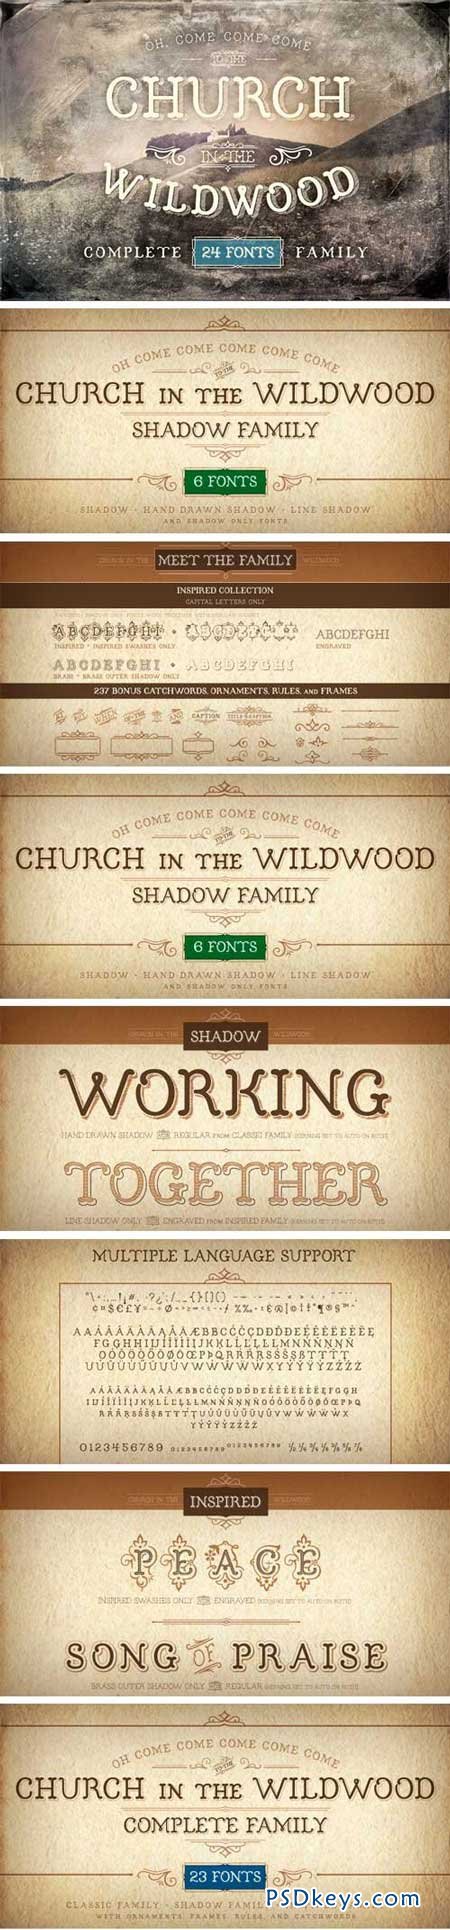 Church in the Wildwood Font Family - 24 Fonts for $40